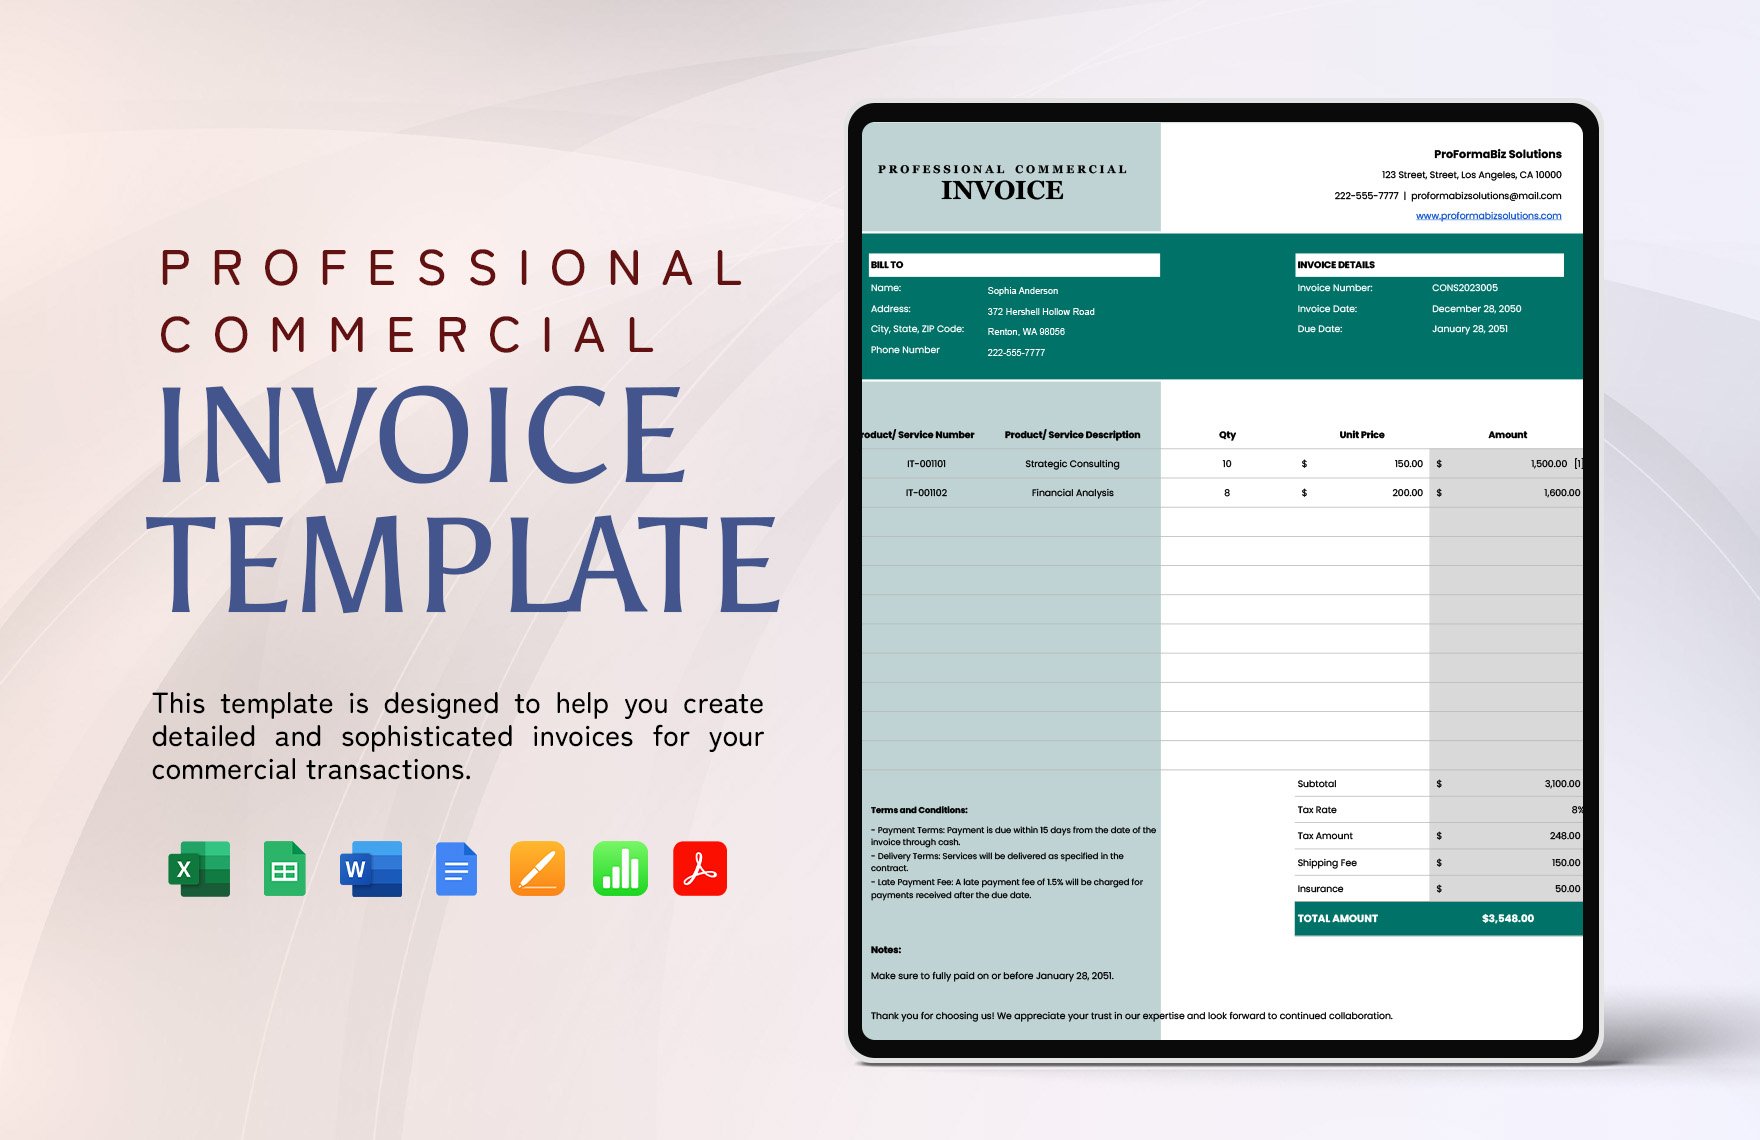 Professional Commercial Invoice Template